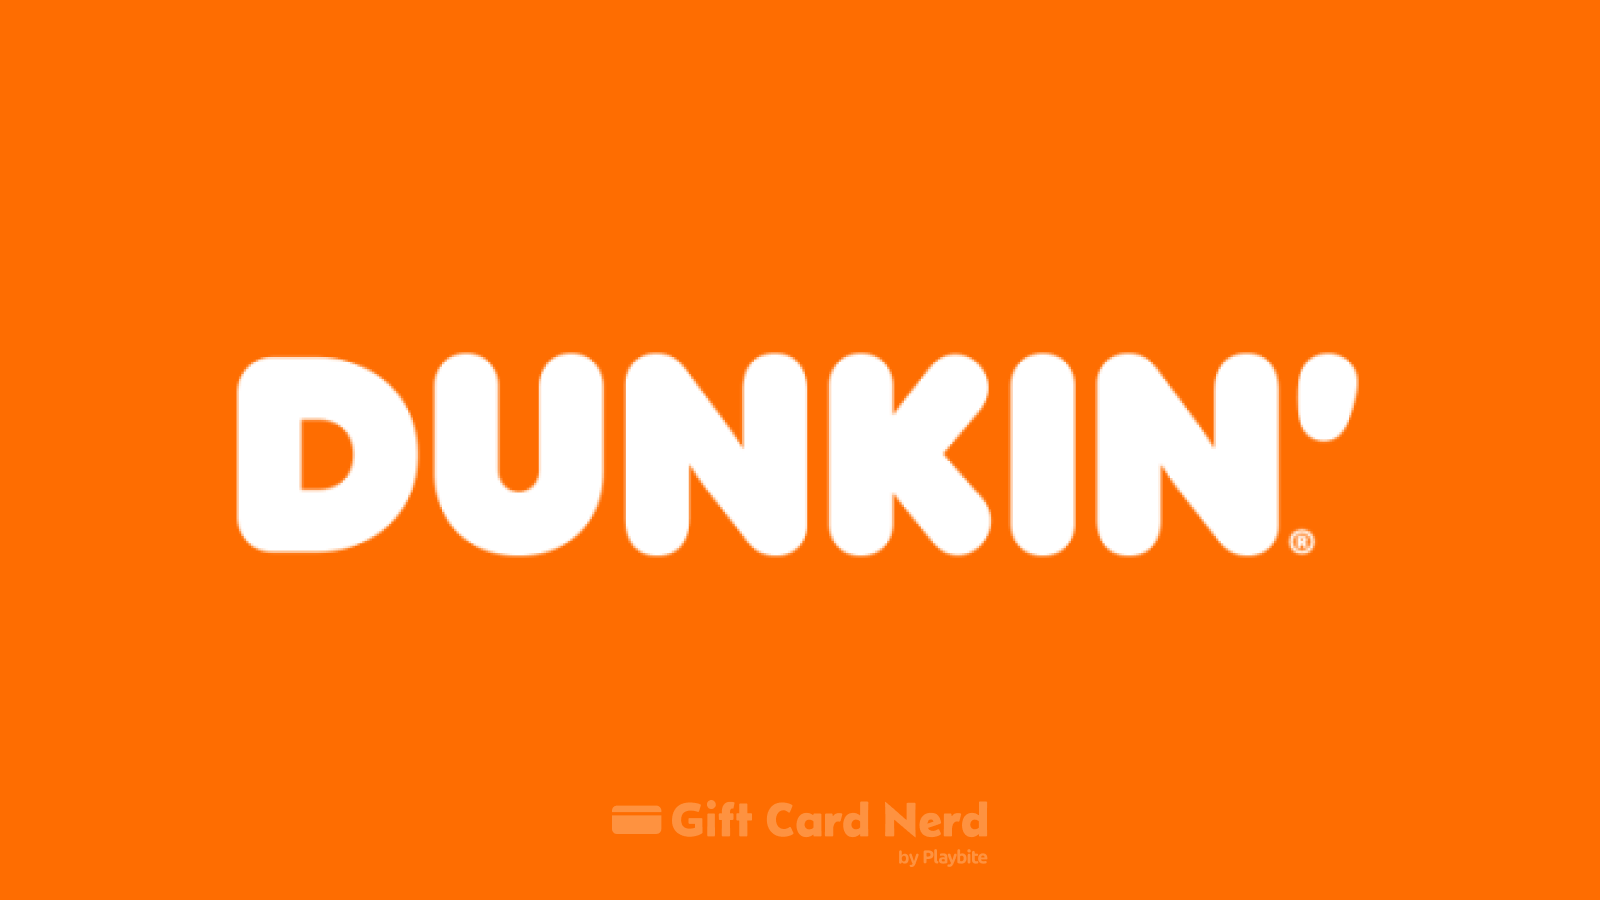 Can I Use a Dunkin Gift Card on DoorDash?